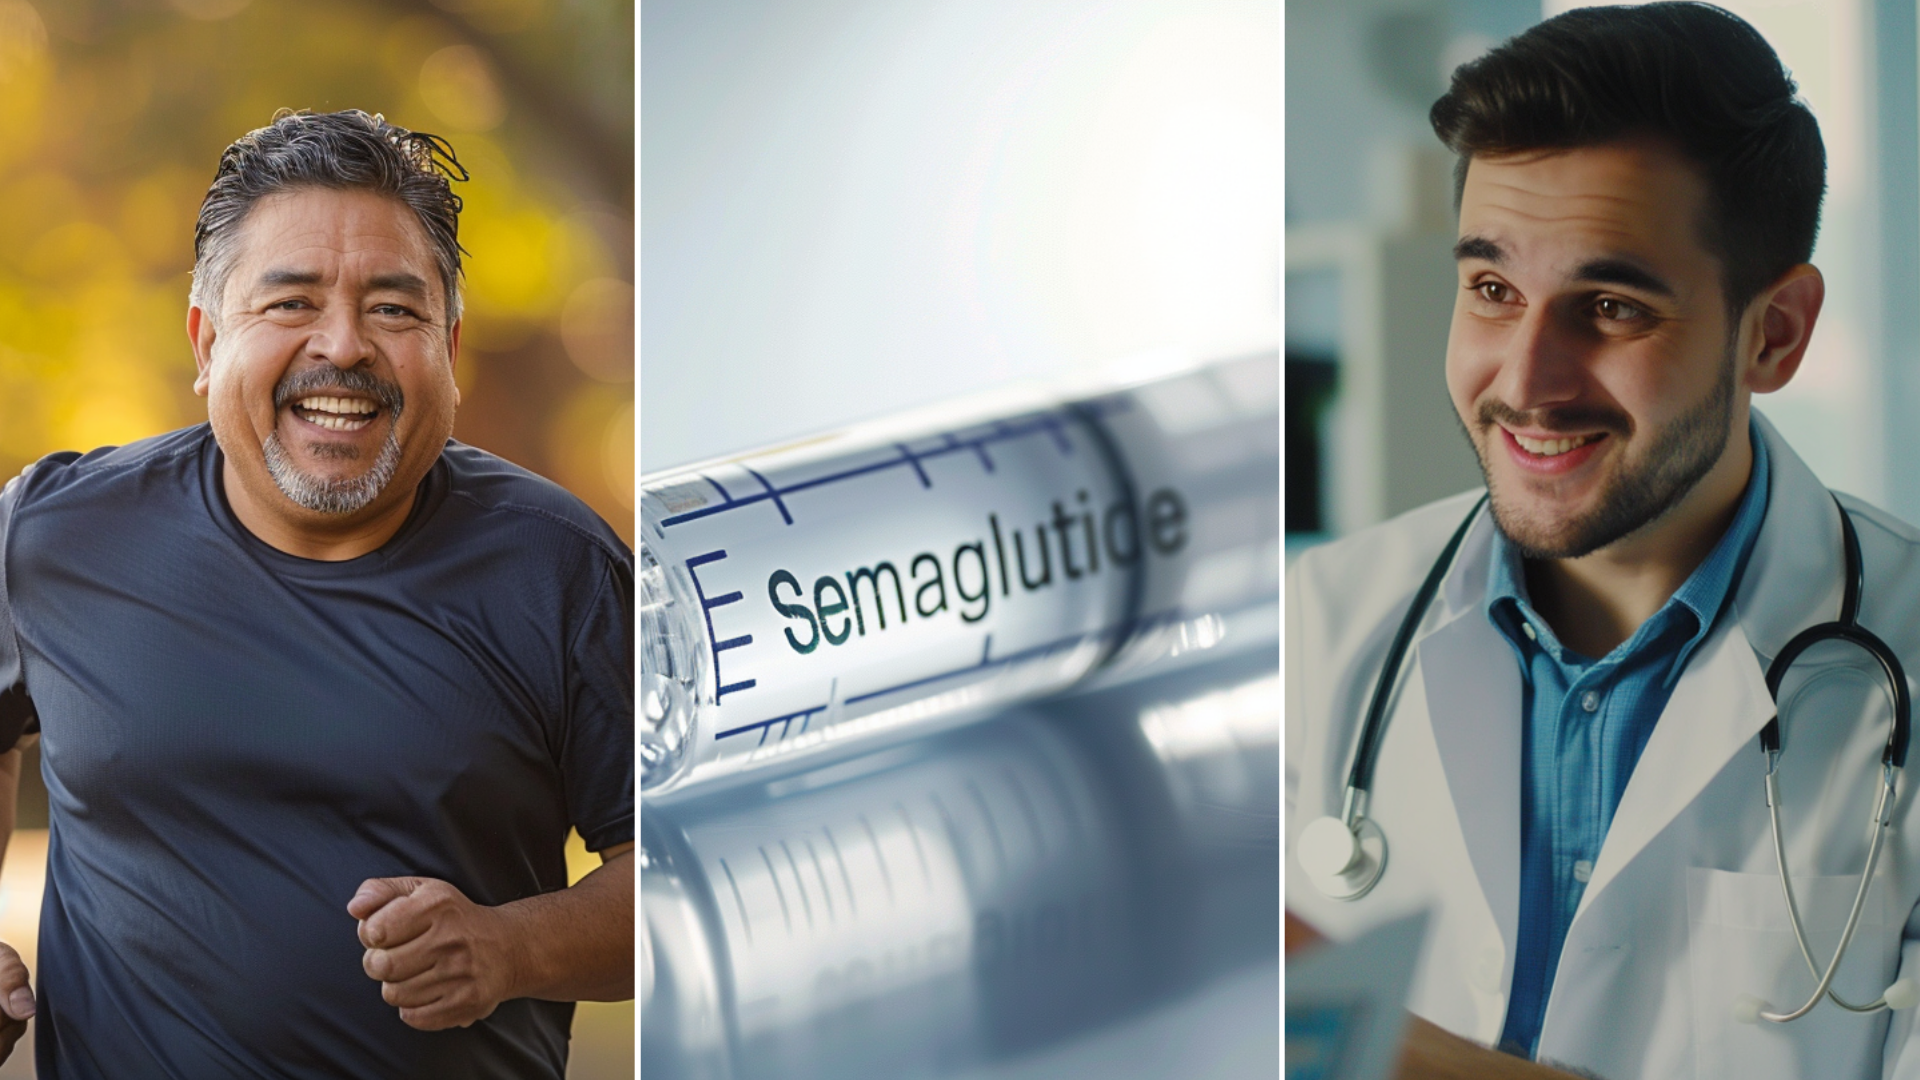 A doctor wearing a white coat and holding a medical chart inside the clinic, having a conversation with a patient, captures the face. A hispanic man slightly overweight mid 50-60 year running position, outdoor park. A medical syringe labeled "Semaglutide"